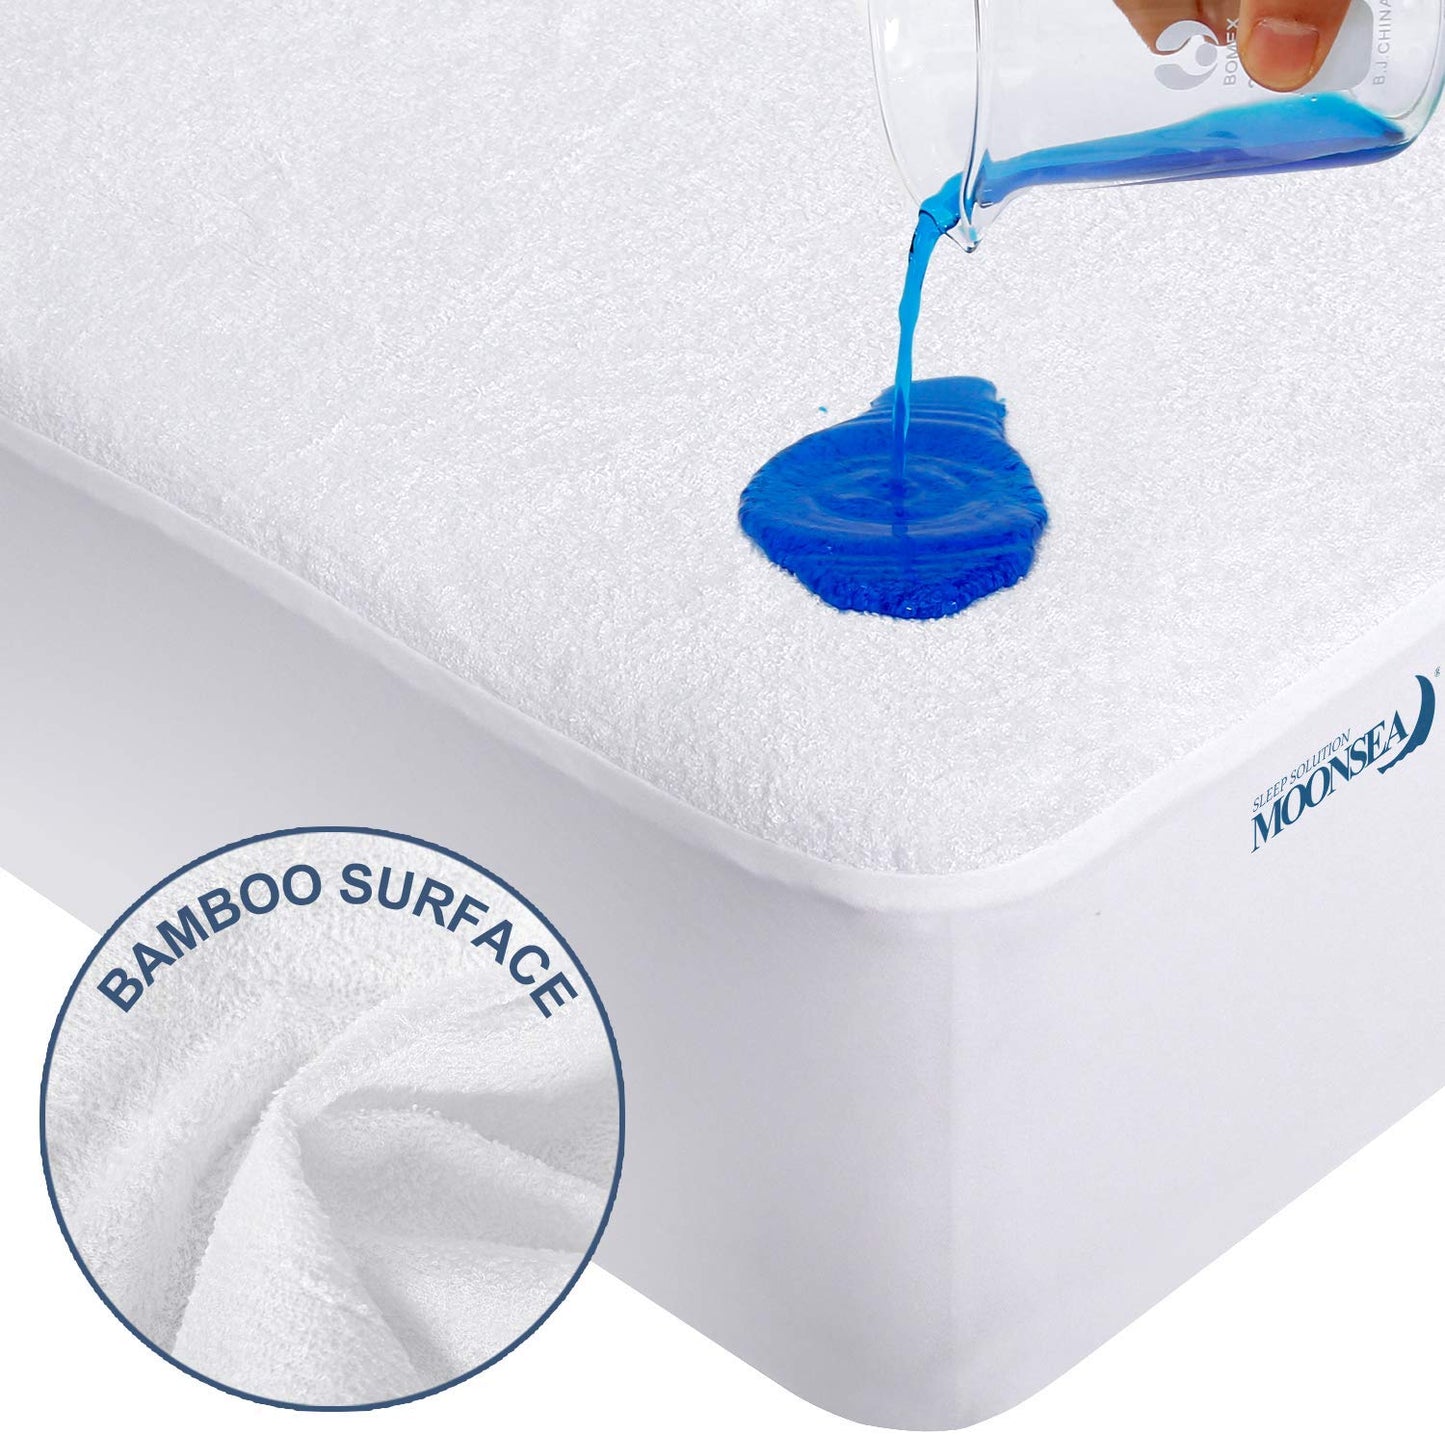 Utopia Bedding Premium Bamboo Waterproof Mattress Protector Full 340 GSM,  Fits 15 Inches Deep, Easy Care - Maple City Timepieces